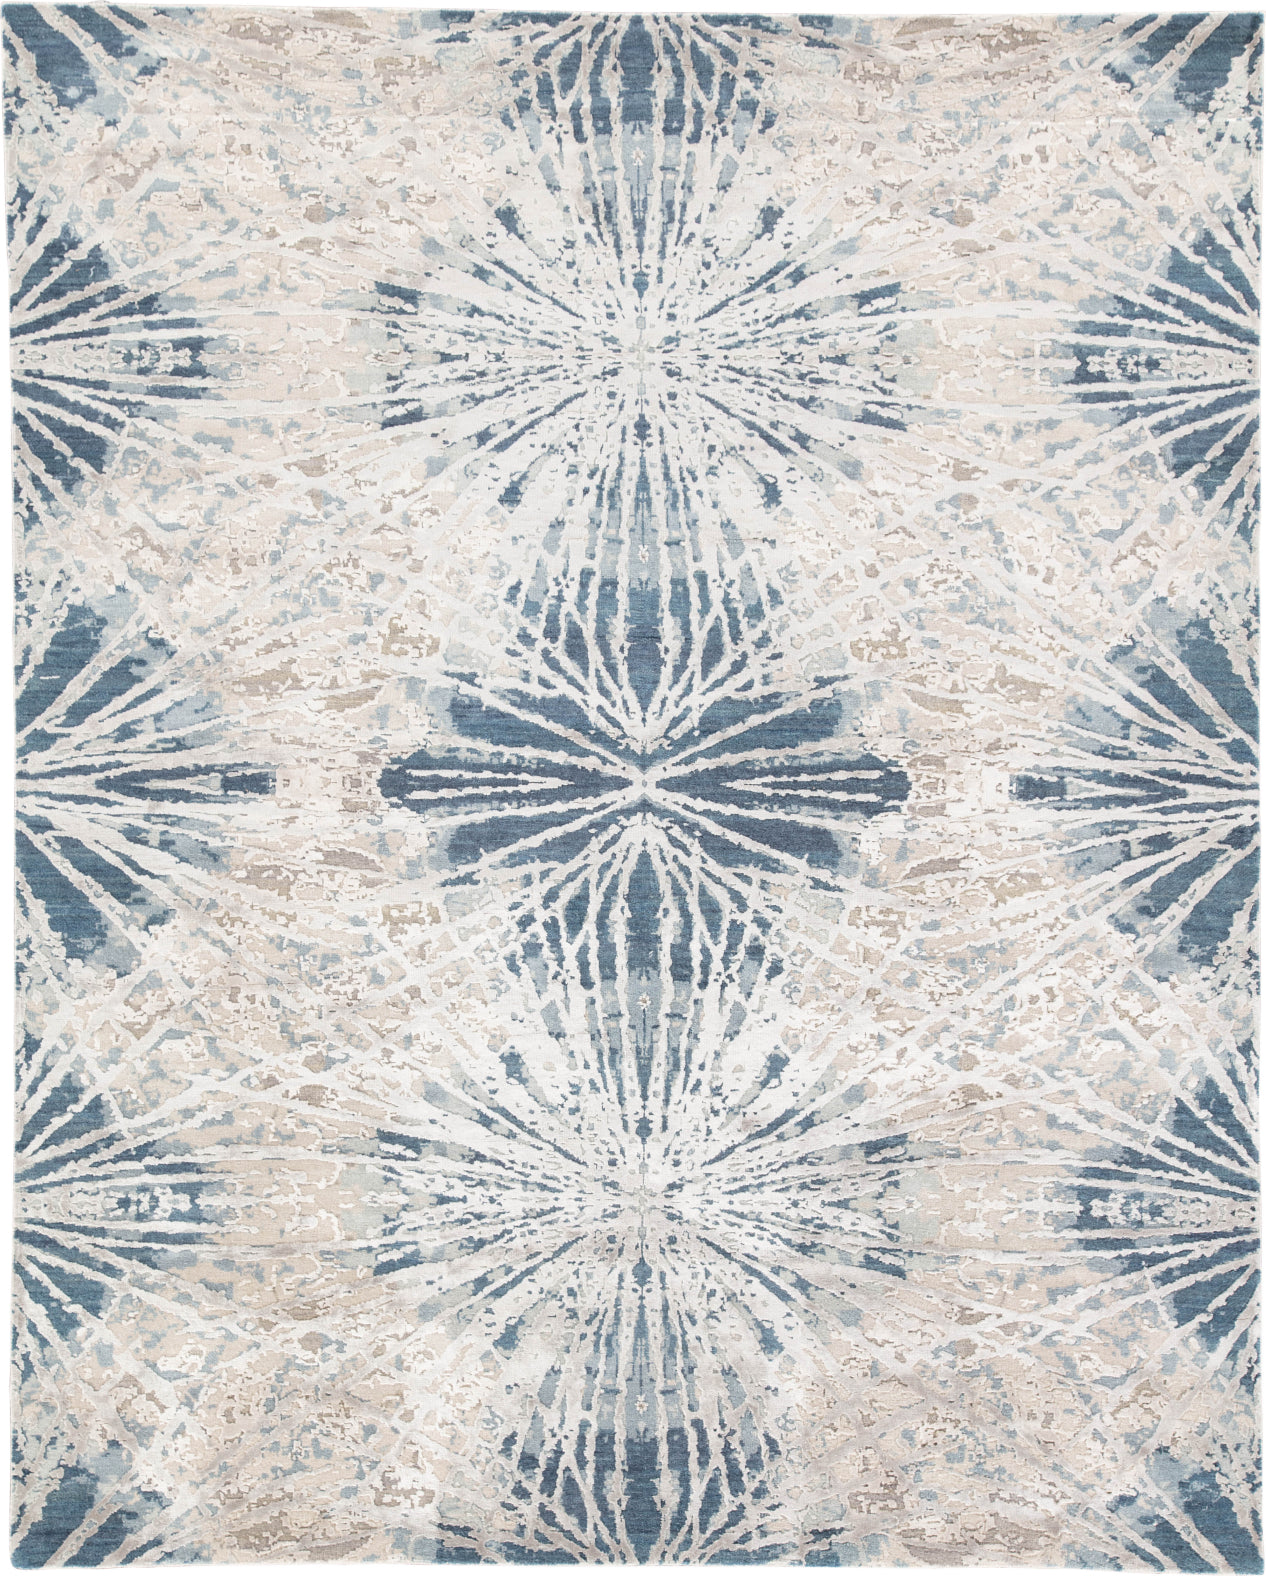 Jaipur Living Chaos Theory By Kavi Thea CKV30 White/Navy Area Rug - Top Down